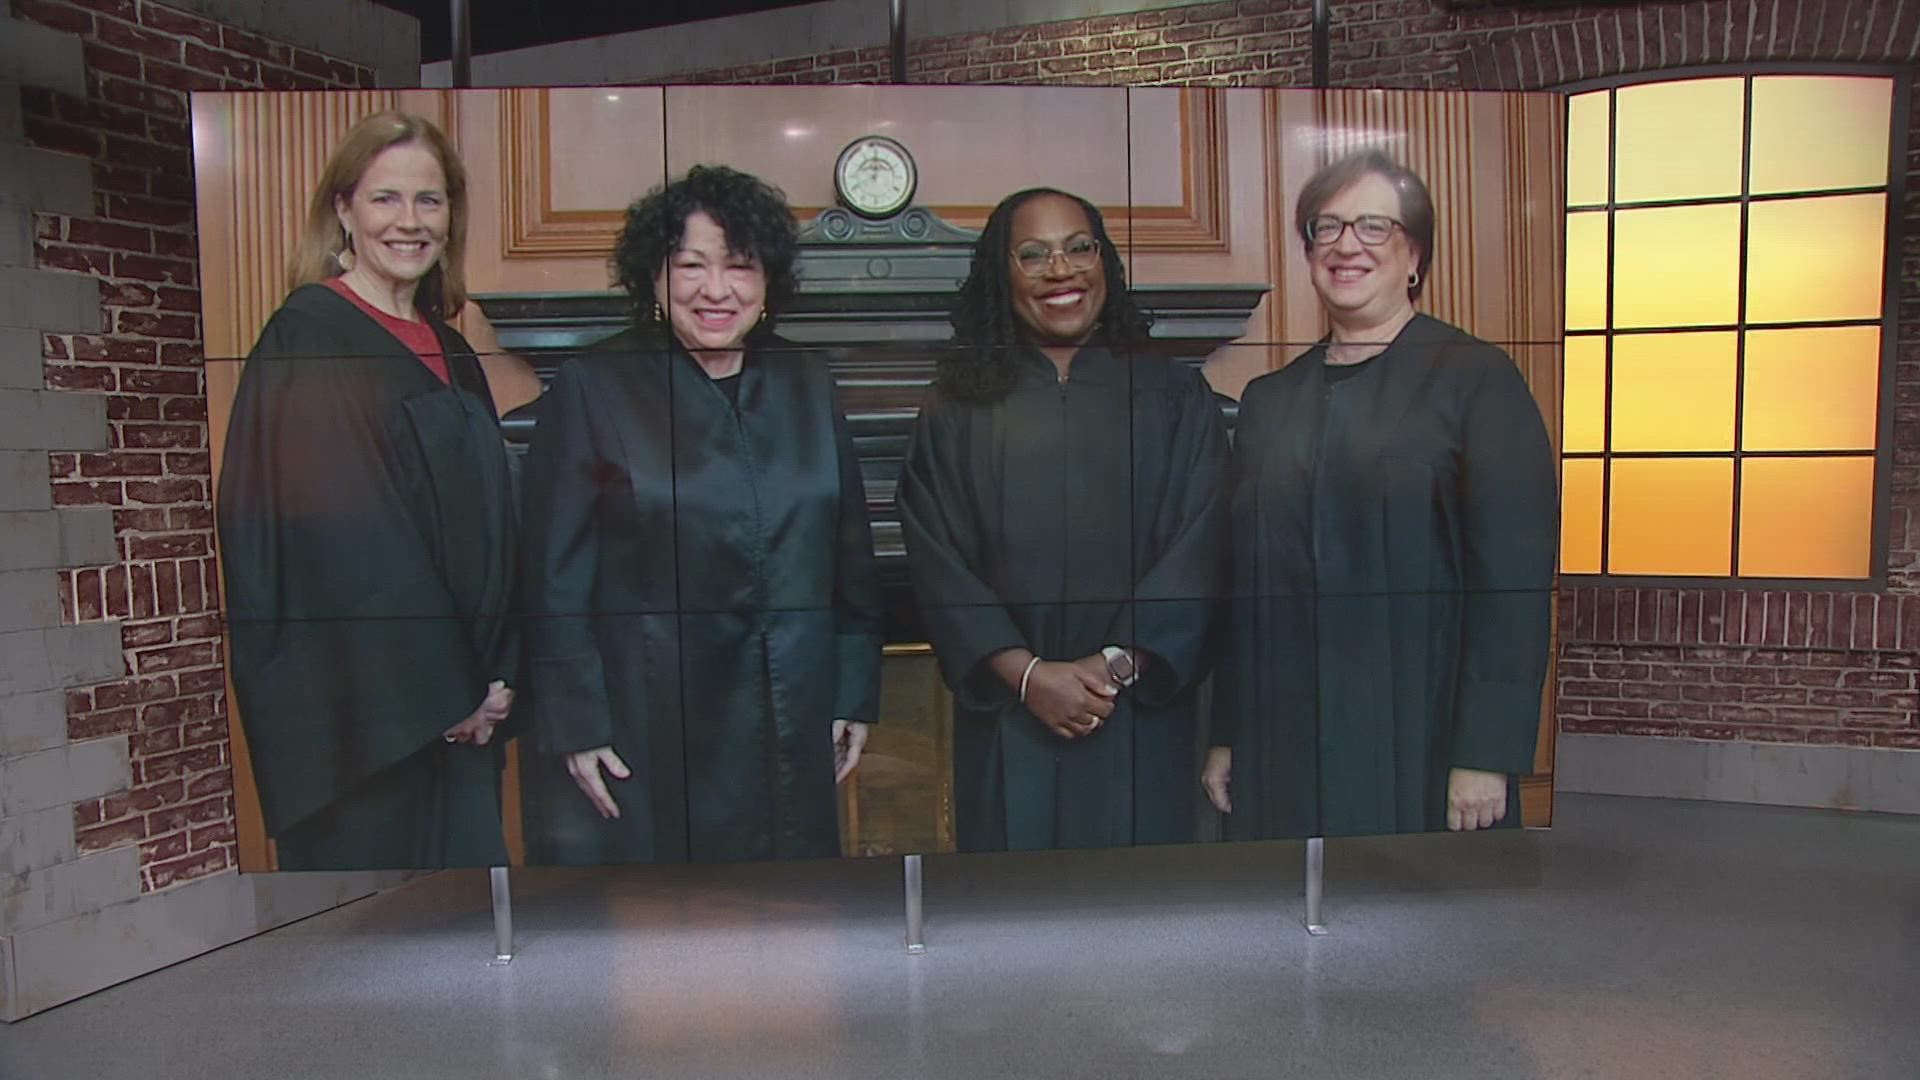 The four female Justices posed for a special photo after Ketanji Brown Jackson was sworn in.